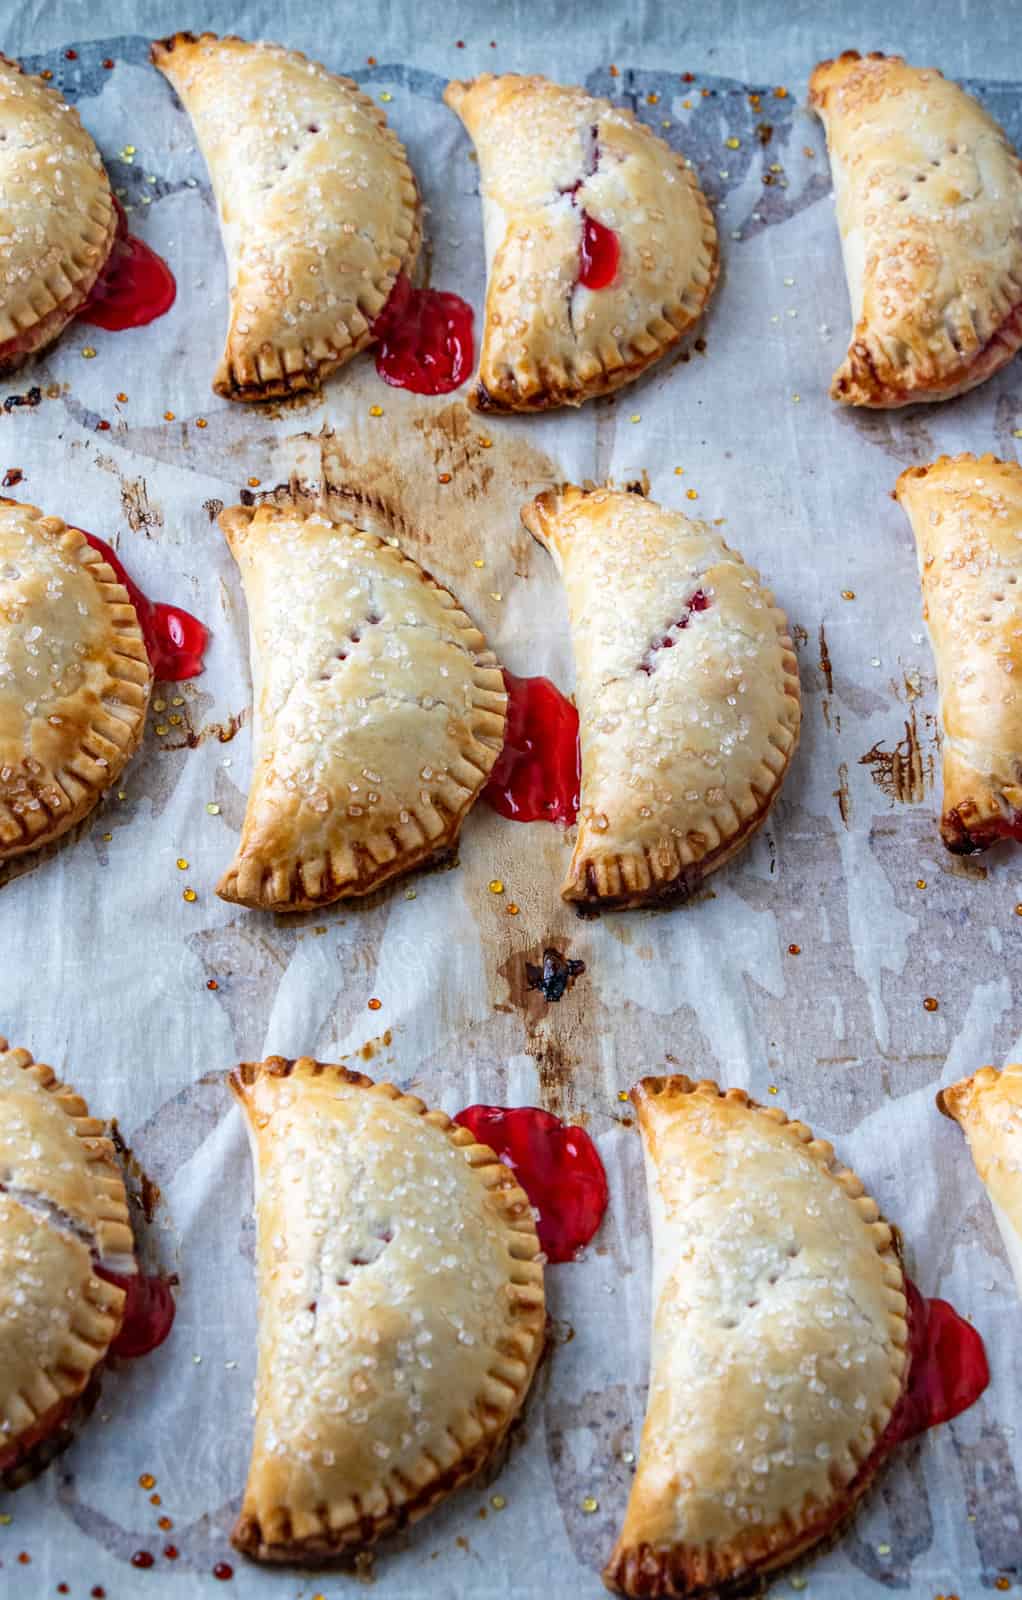 Baked Hand Pies on baking sheet right out of oven